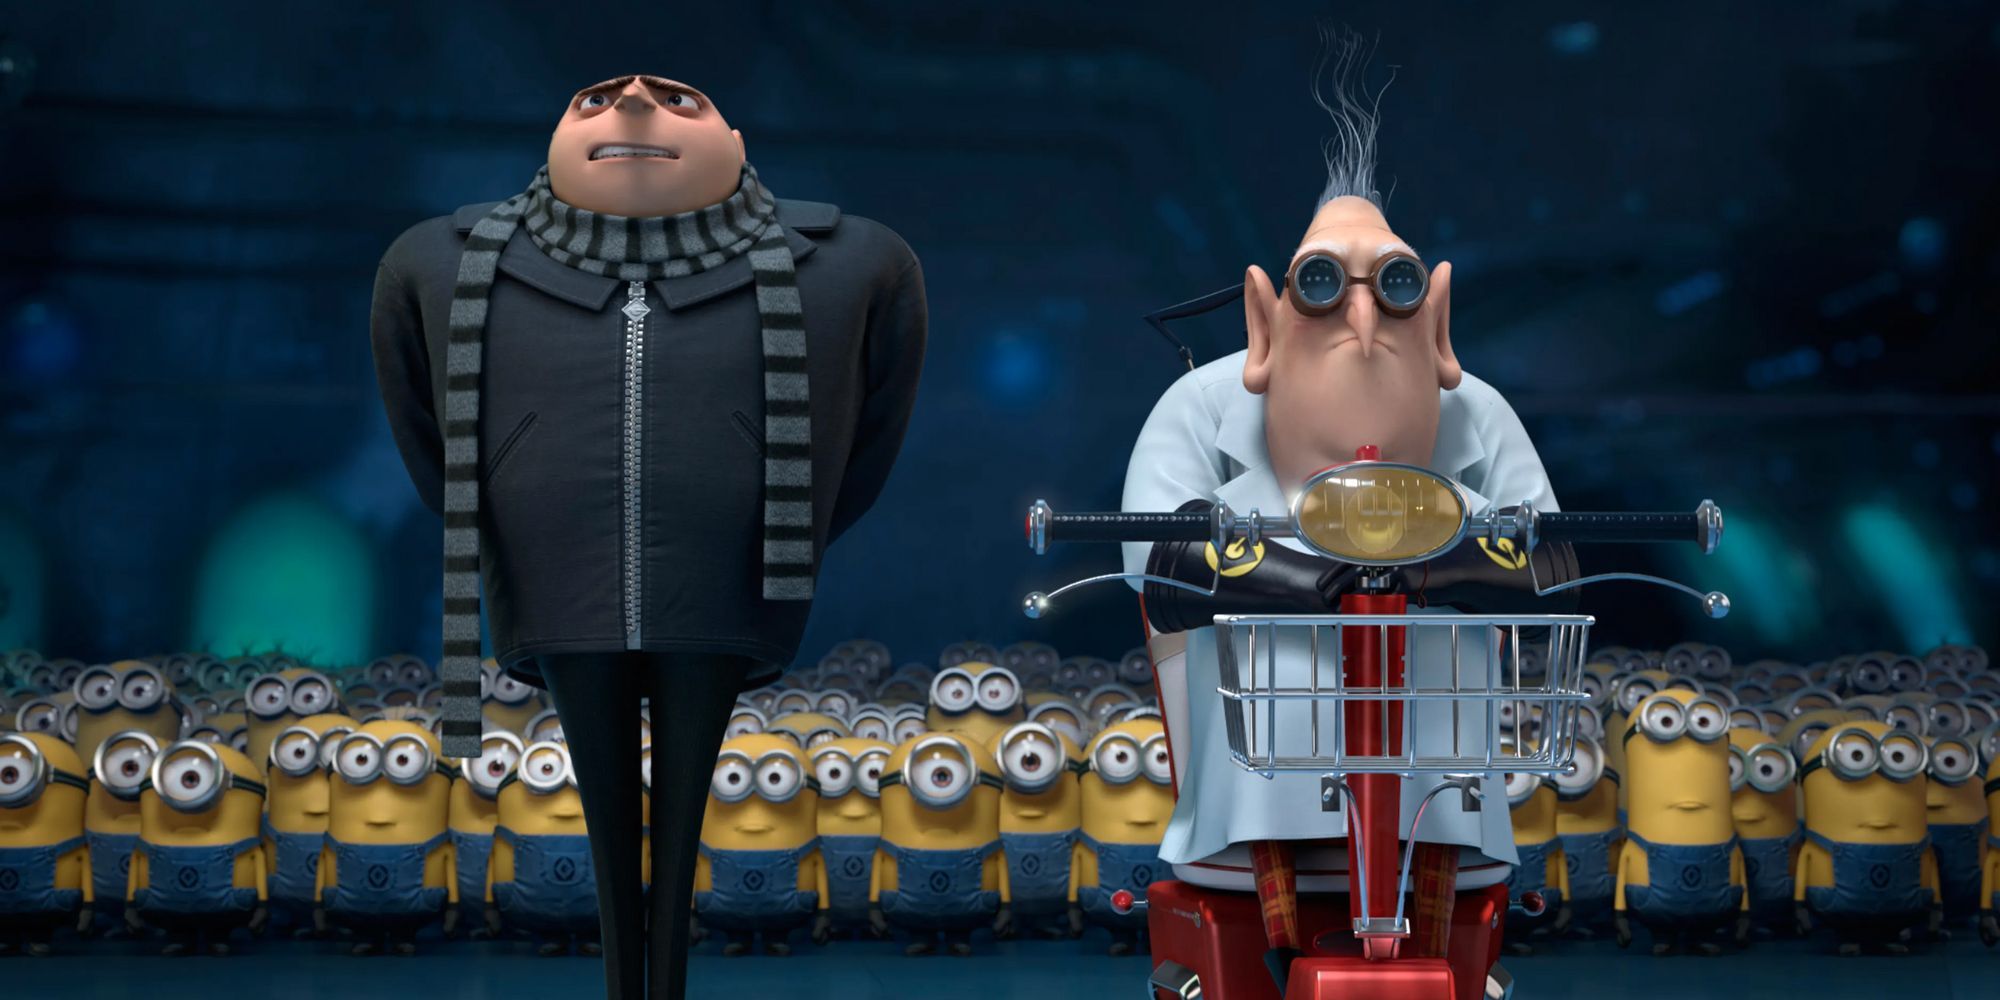 Gru (left) and Dr. Nefario (right) stand with an army of minions at their back